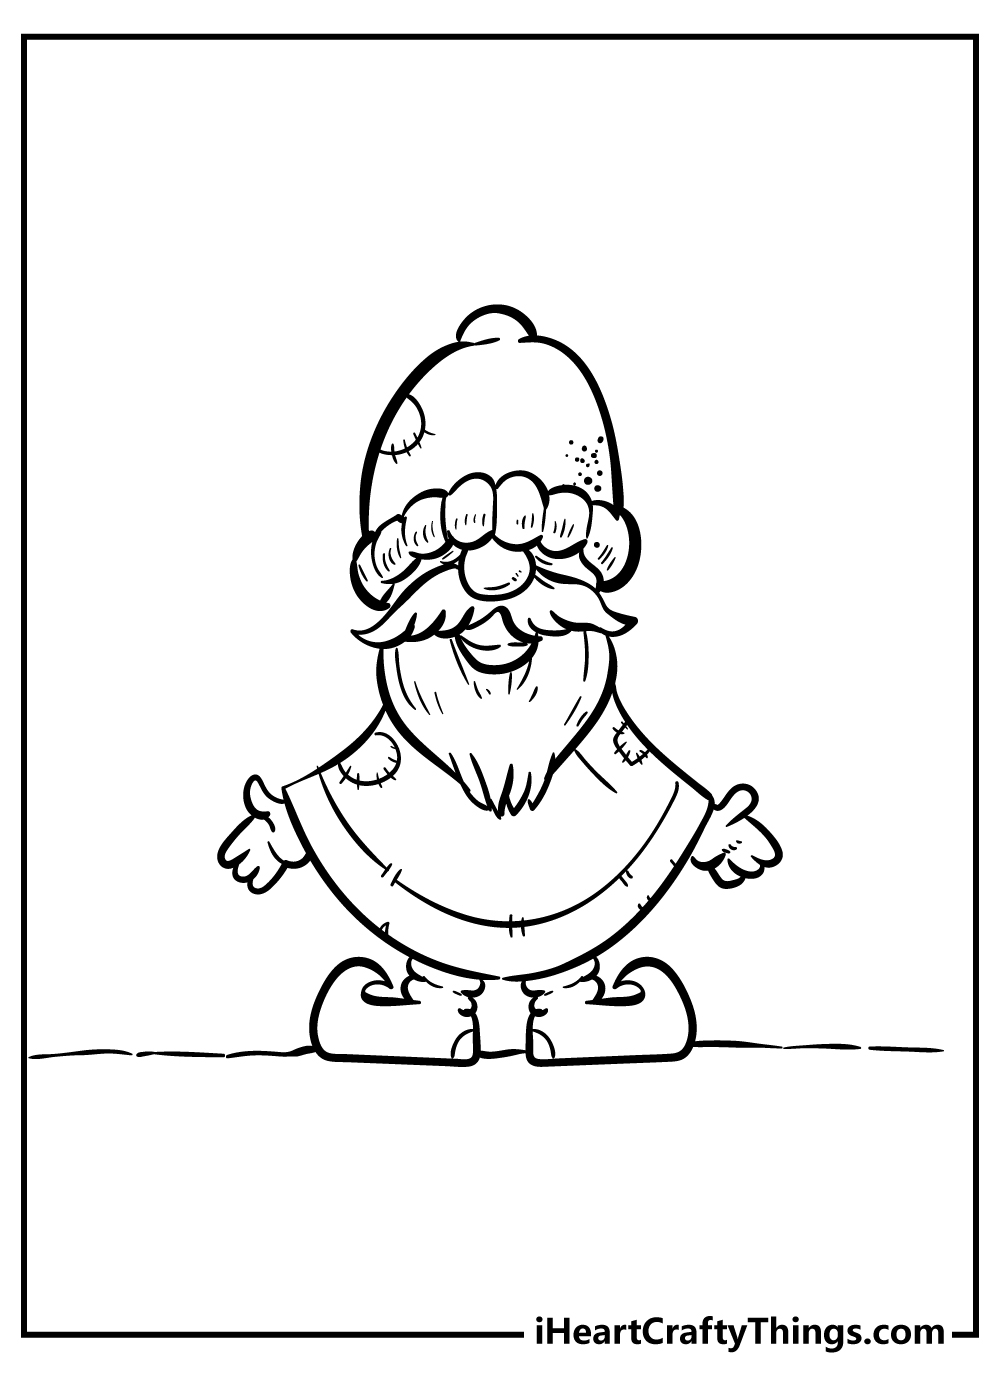 Gnomes Coloring Pages free pdf download